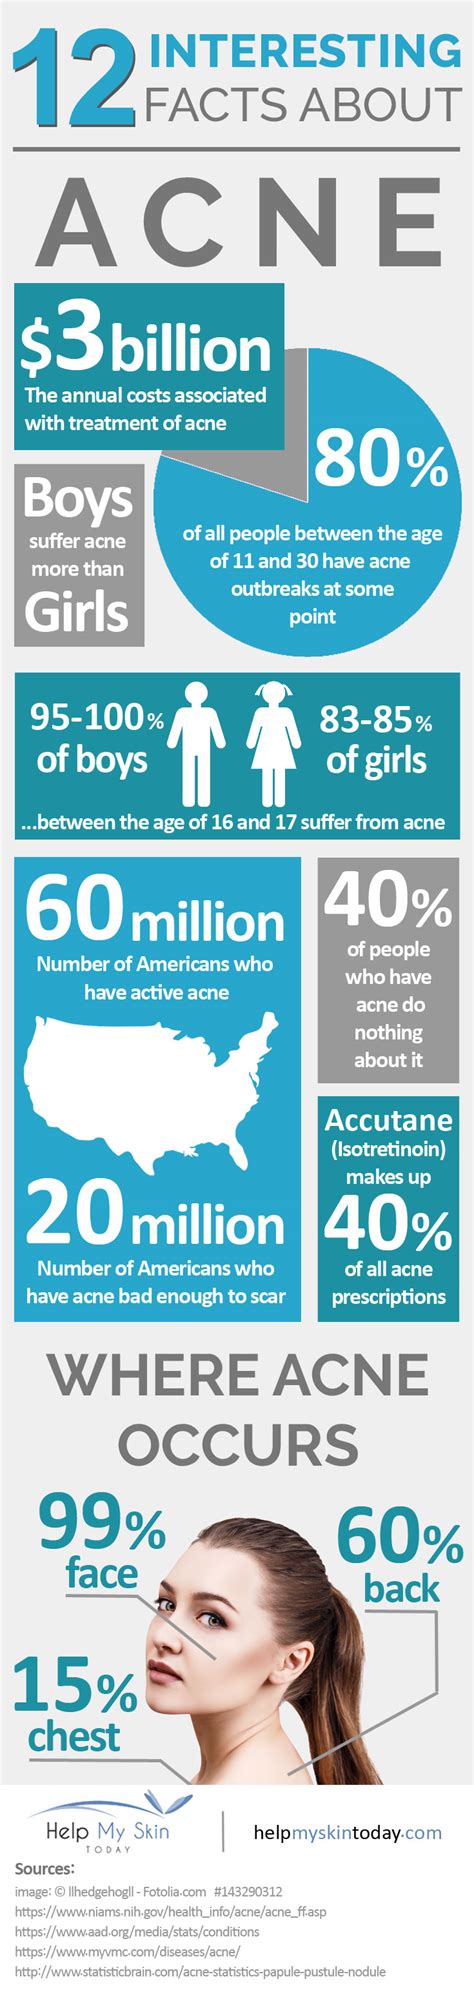 12 Interesting Facts About Acne Help My Skin Today